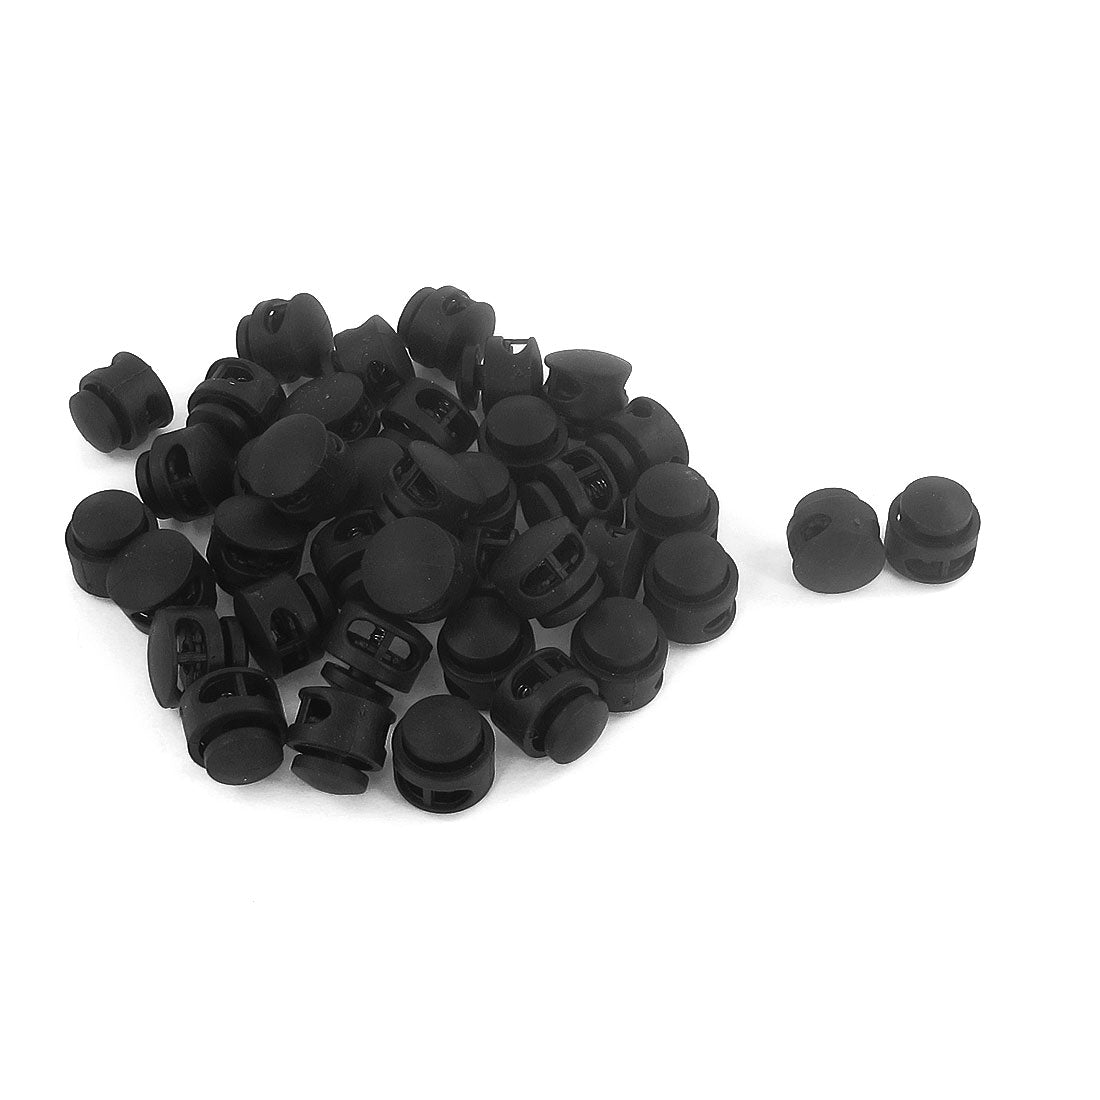 uxcell Uxcell Backpack Luggage Toggle Stopper Cord Locks Ends Black 40 Pcs